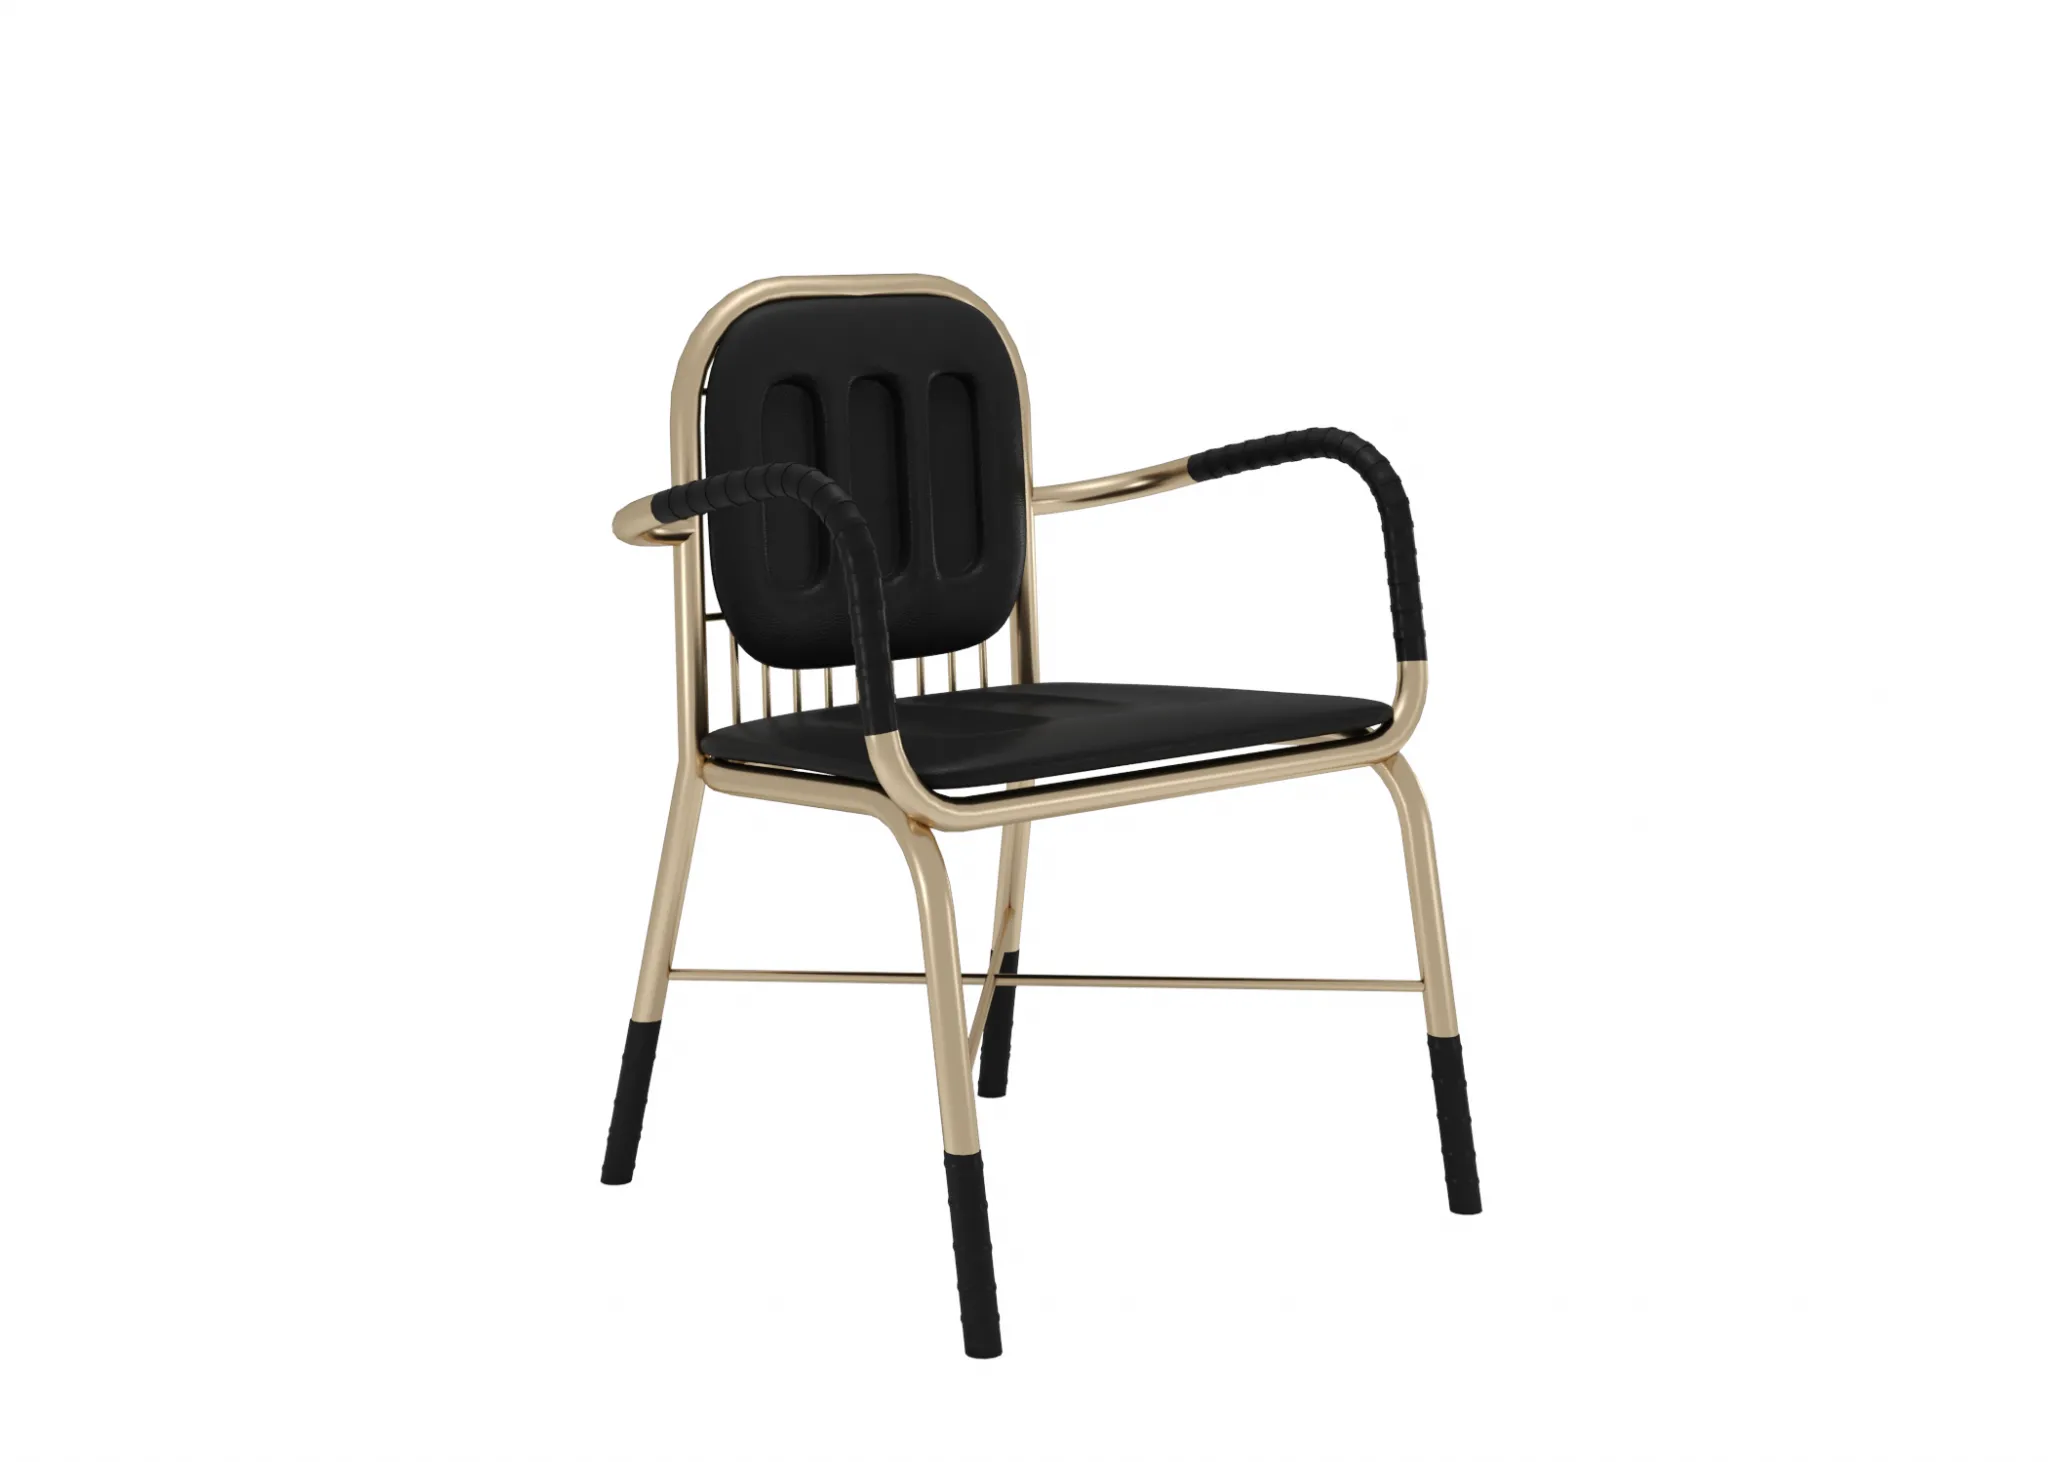 FURNITURE 3D MODELS – CHAIRS – 0425